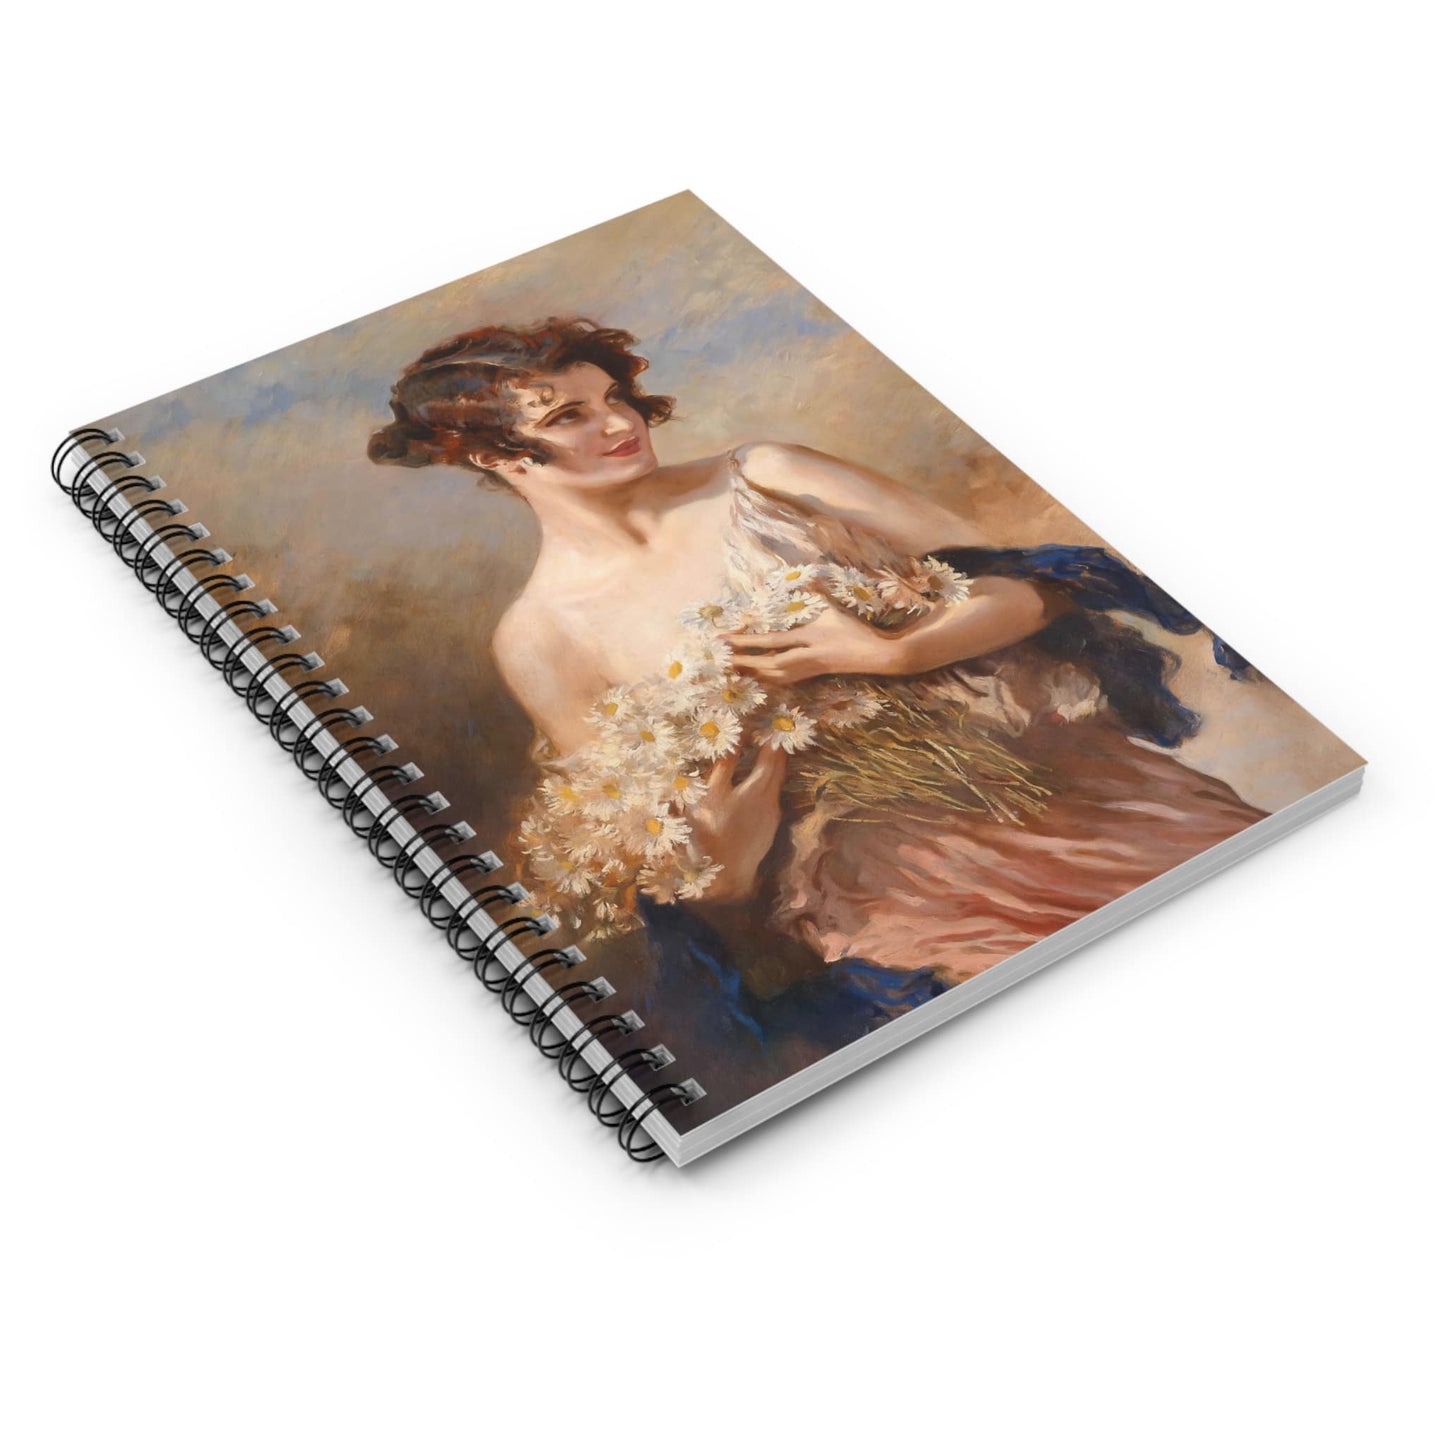 Hands Full of Flowers Spiral Notebook Laying Flat on White Surface